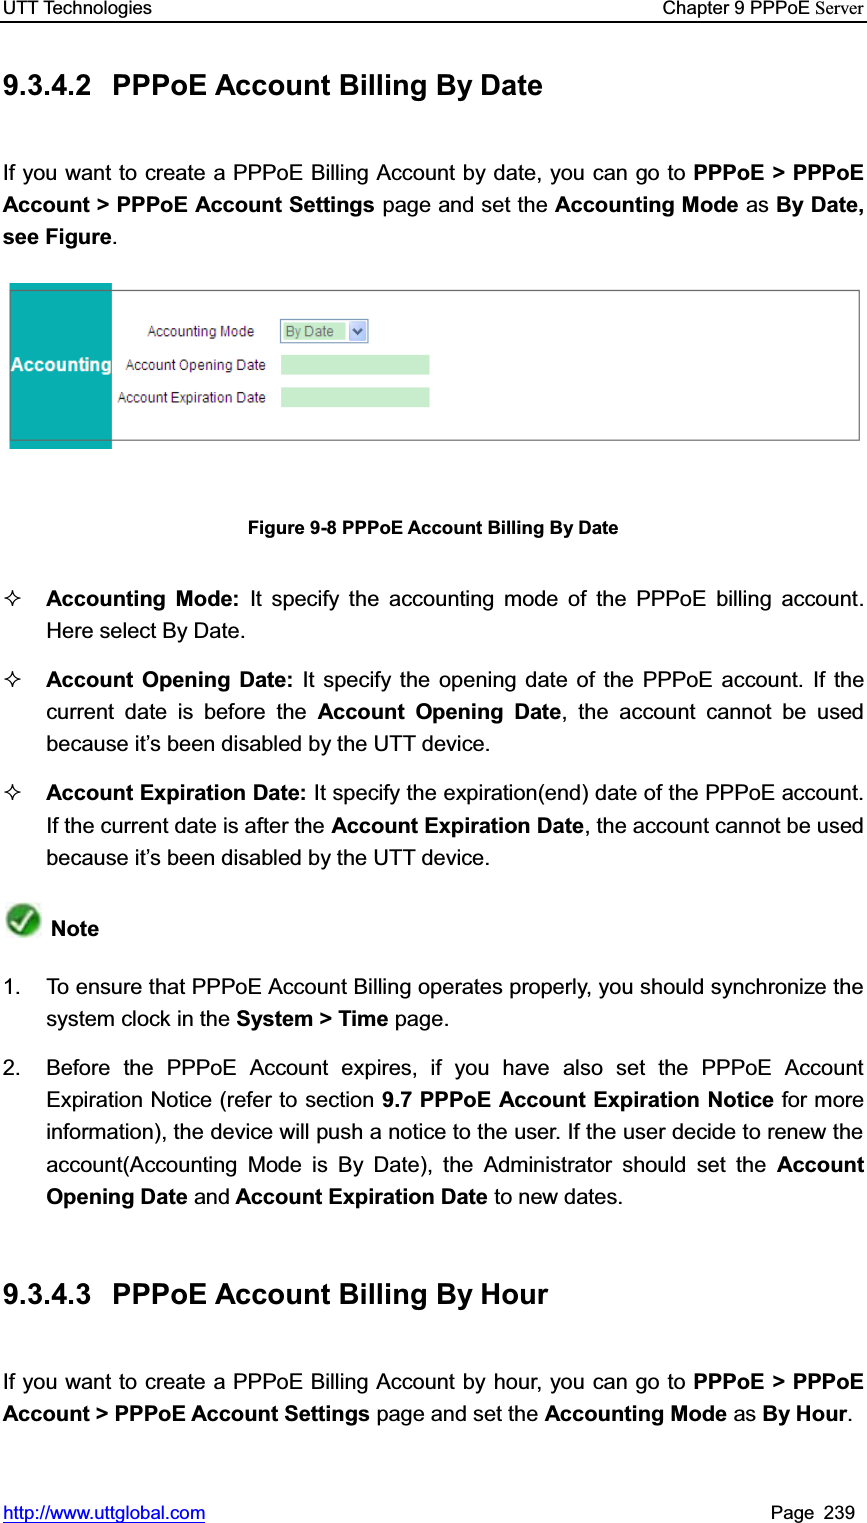 UTT Technologies    Chapter 9 PPPoE Serverhttp://www.uttglobal.com Page 239 9.3.4.2  PPPoE Account Billing By Date If you want to create a PPPoE Billing Account by date, you can go to PPPoE &gt; PPPoE Account &gt; PPPoE Account Settings page and set the Accounting Mode as By Date, see Figure.Figure 9-8 PPPoE Account Billing By Date Accounting Mode: It specify the accounting mode of the PPPoE billing account. Here select By Date. Account Opening Date: It specify the opening date of the PPPoE account. If the current date is before the Account Opening Date, the account cannot be usedbecause it¶s been disabled by the UTT device. Account Expiration Date: It specify the expiration(end) date of the PPPoE account. If the current date is after the Account Expiration Date, the account cannot be used because it¶s been disabled by the UTT device. Note1.  To ensure that PPPoE Account Billing operates properly, you should synchronize the system clock in the System &gt; Time page. 2.  Before the PPPoE Account expires, if you have also set the PPPoE Account Expiration Notice (refer to section 9.7 PPPoE Account Expiration Notice for more information), the device will push a notice to the user. If the user decide to renew the account(Accounting Mode is By Date), the Administrator should set the Account Opening Date and Account Expiration Date to new dates. 9.3.4.3  PPPoE Account Billing By Hour If you want to create a PPPoE Billing Account by hour, you can go to PPPoE &gt; PPPoE Account &gt; PPPoE Account Settings page and set the Accounting Mode as By Hour.